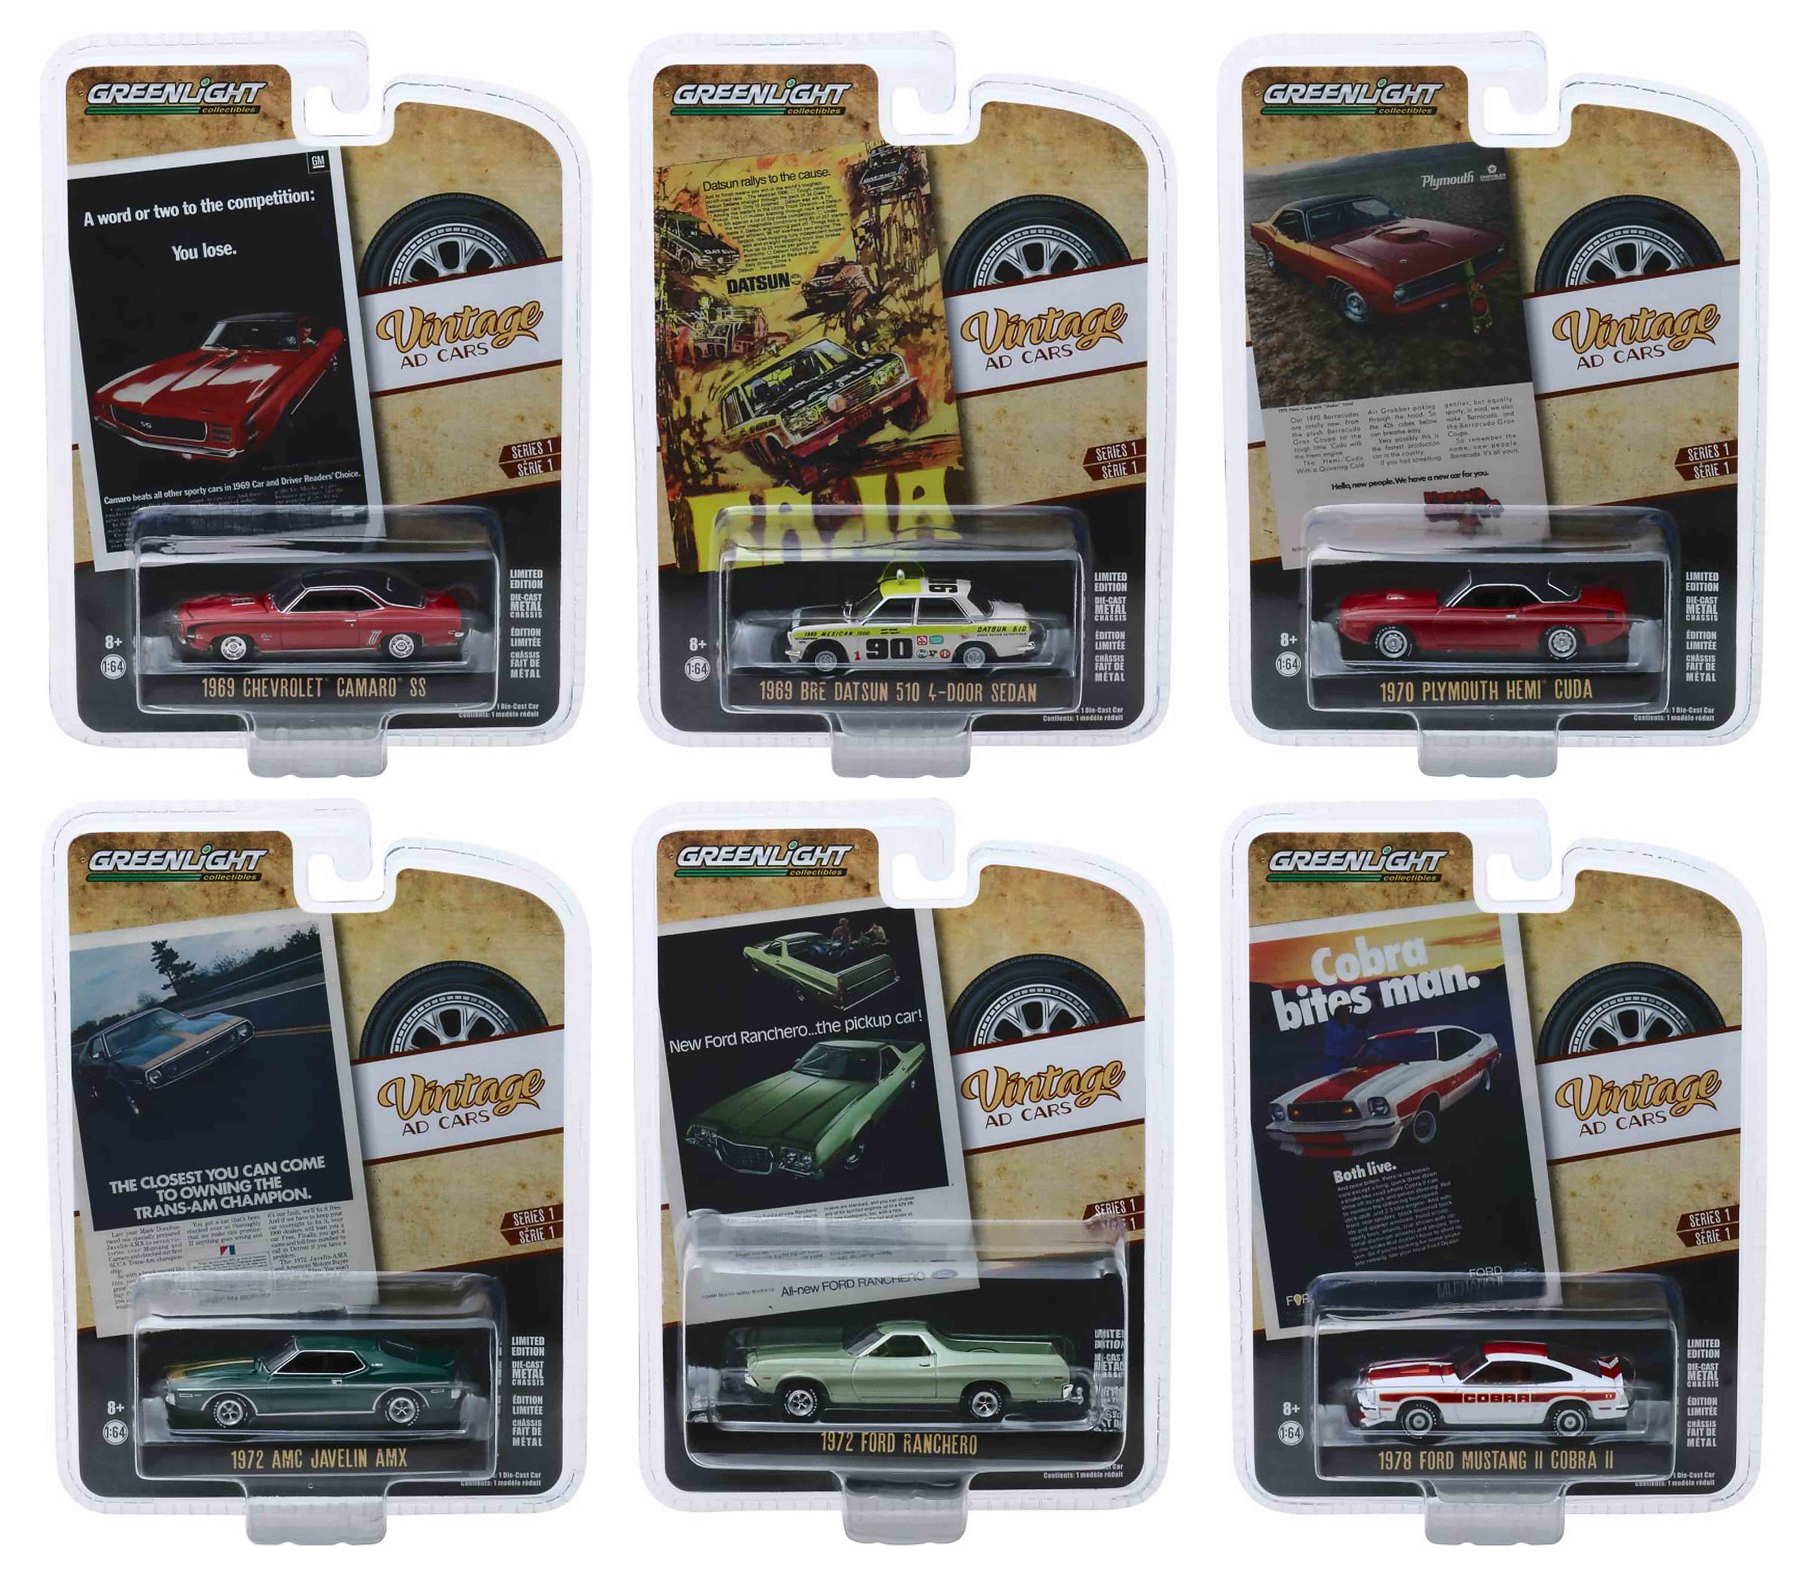 "Vintage Ad Cars" Series 1 6 piece Set 1/64 Diecast Model Cars by Greenlight